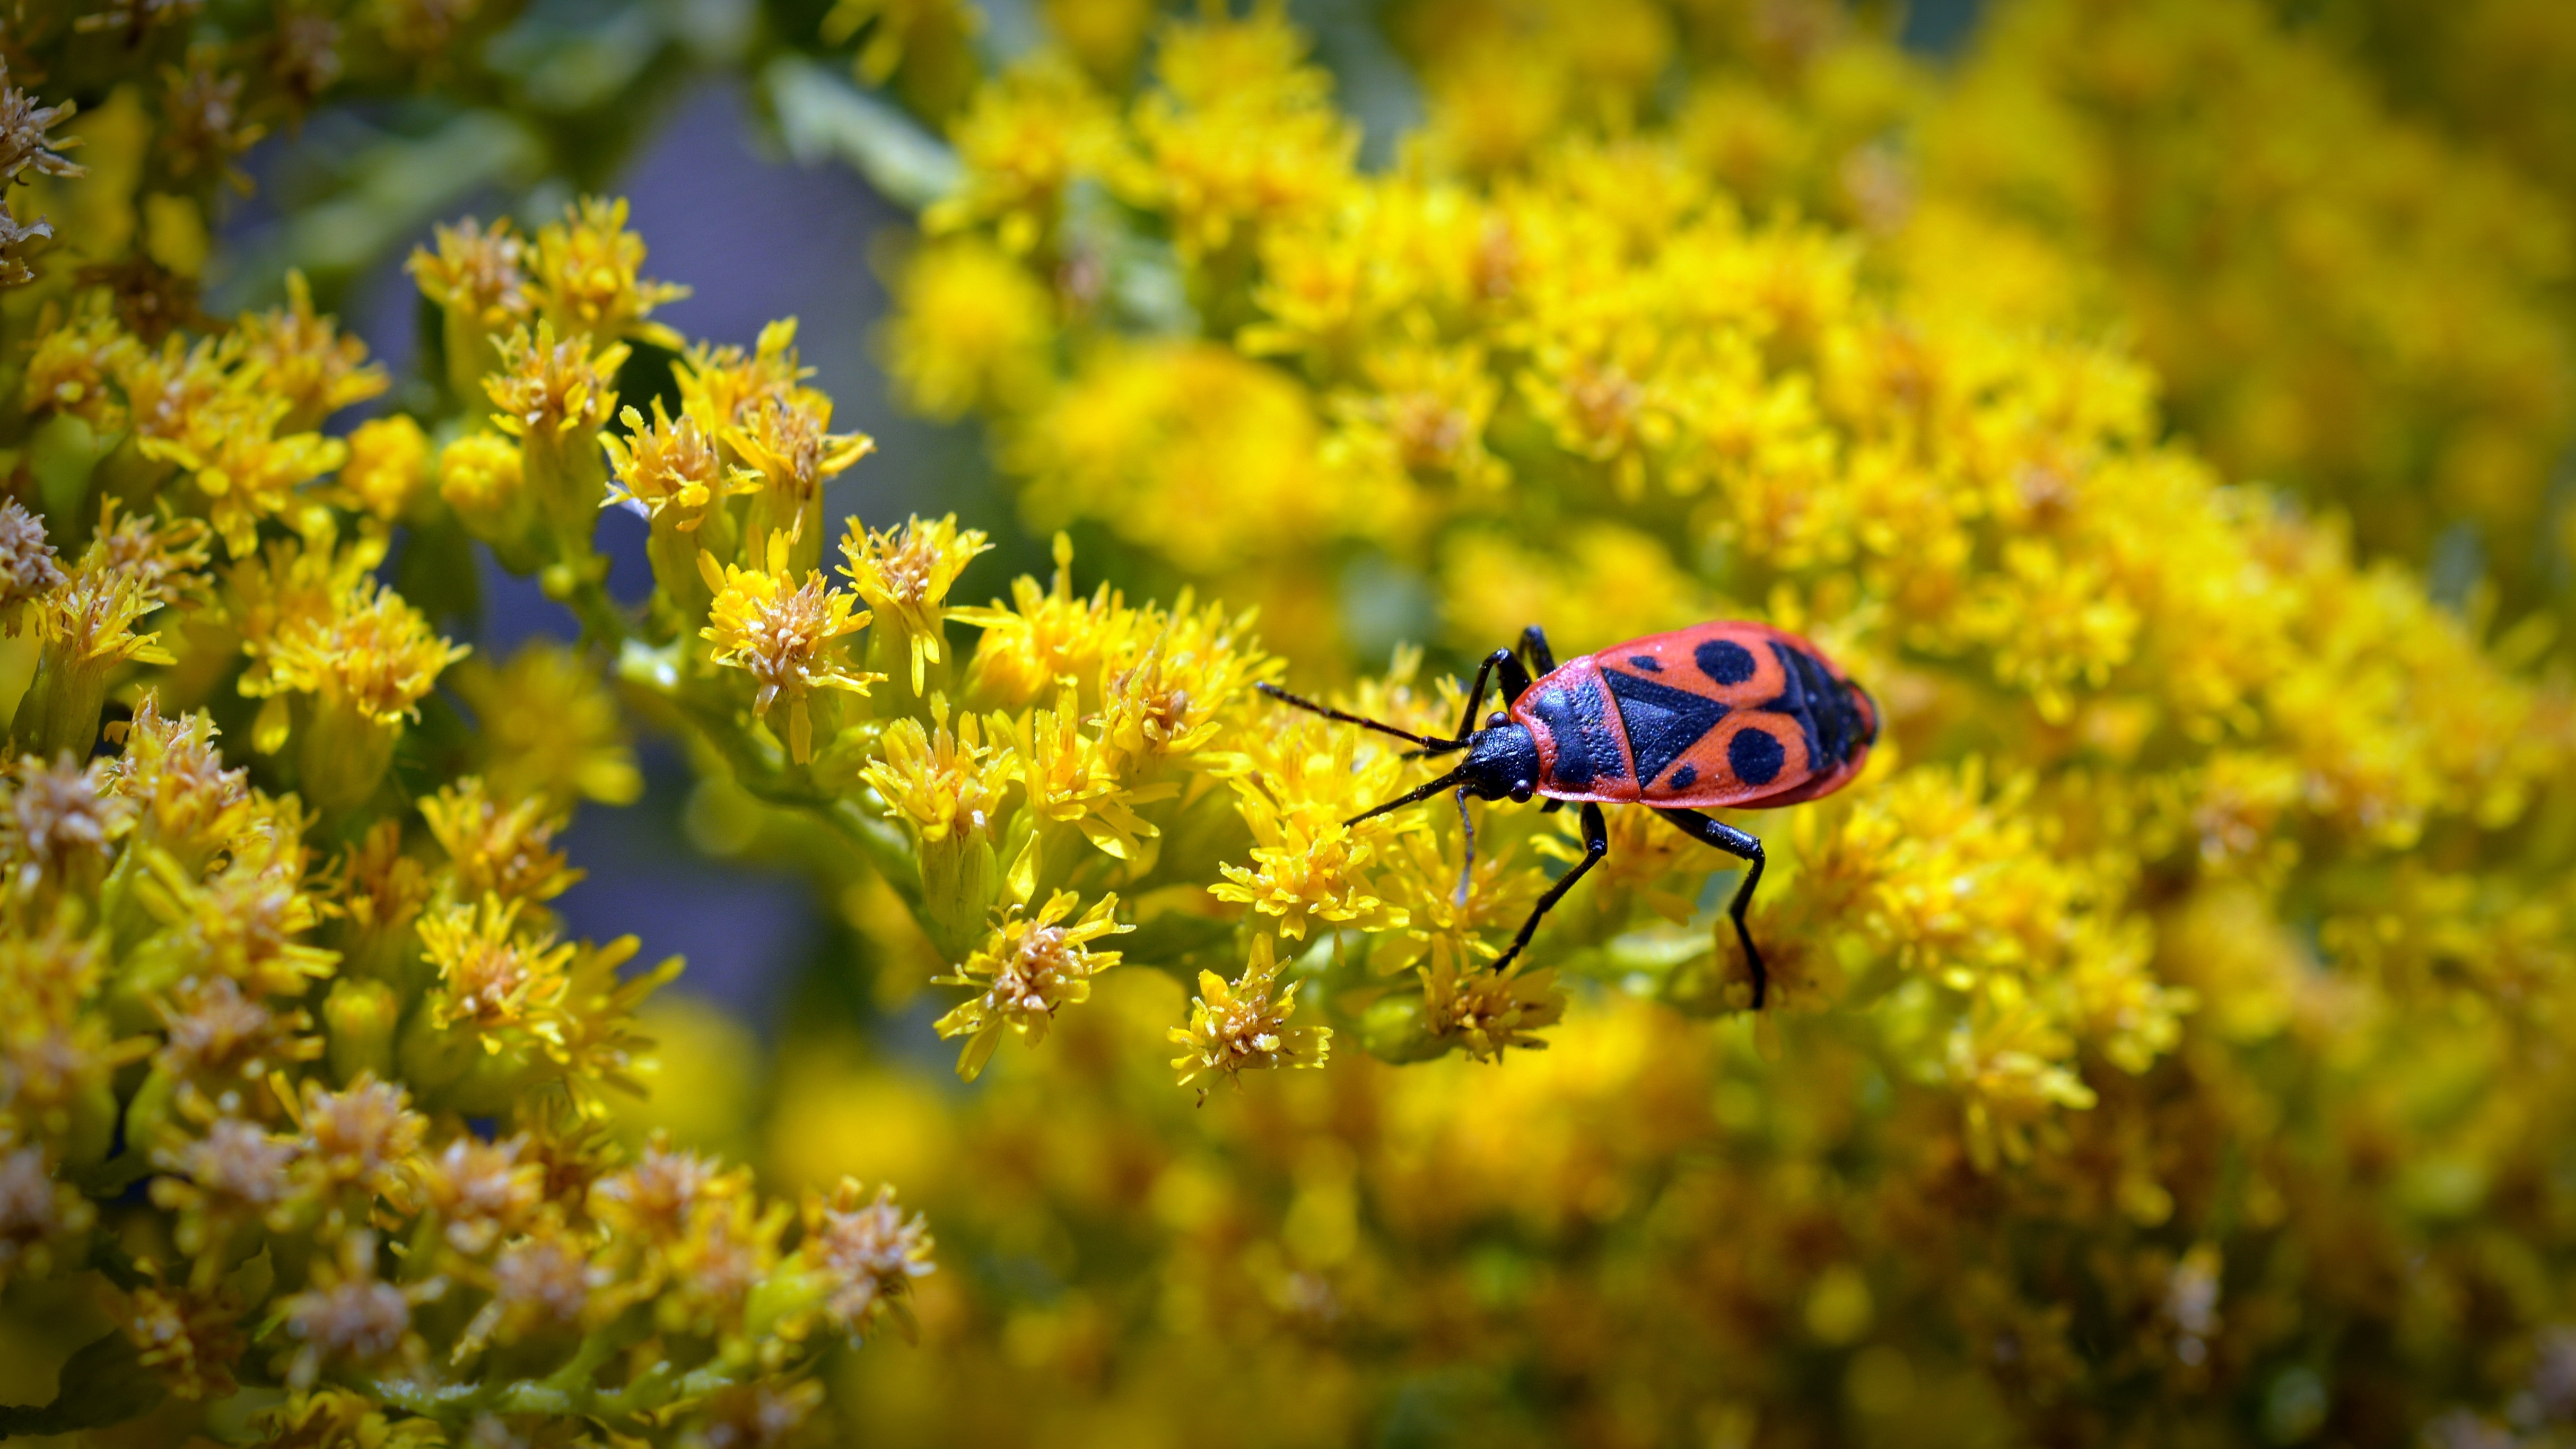 firebug insect on yellow petaled flower